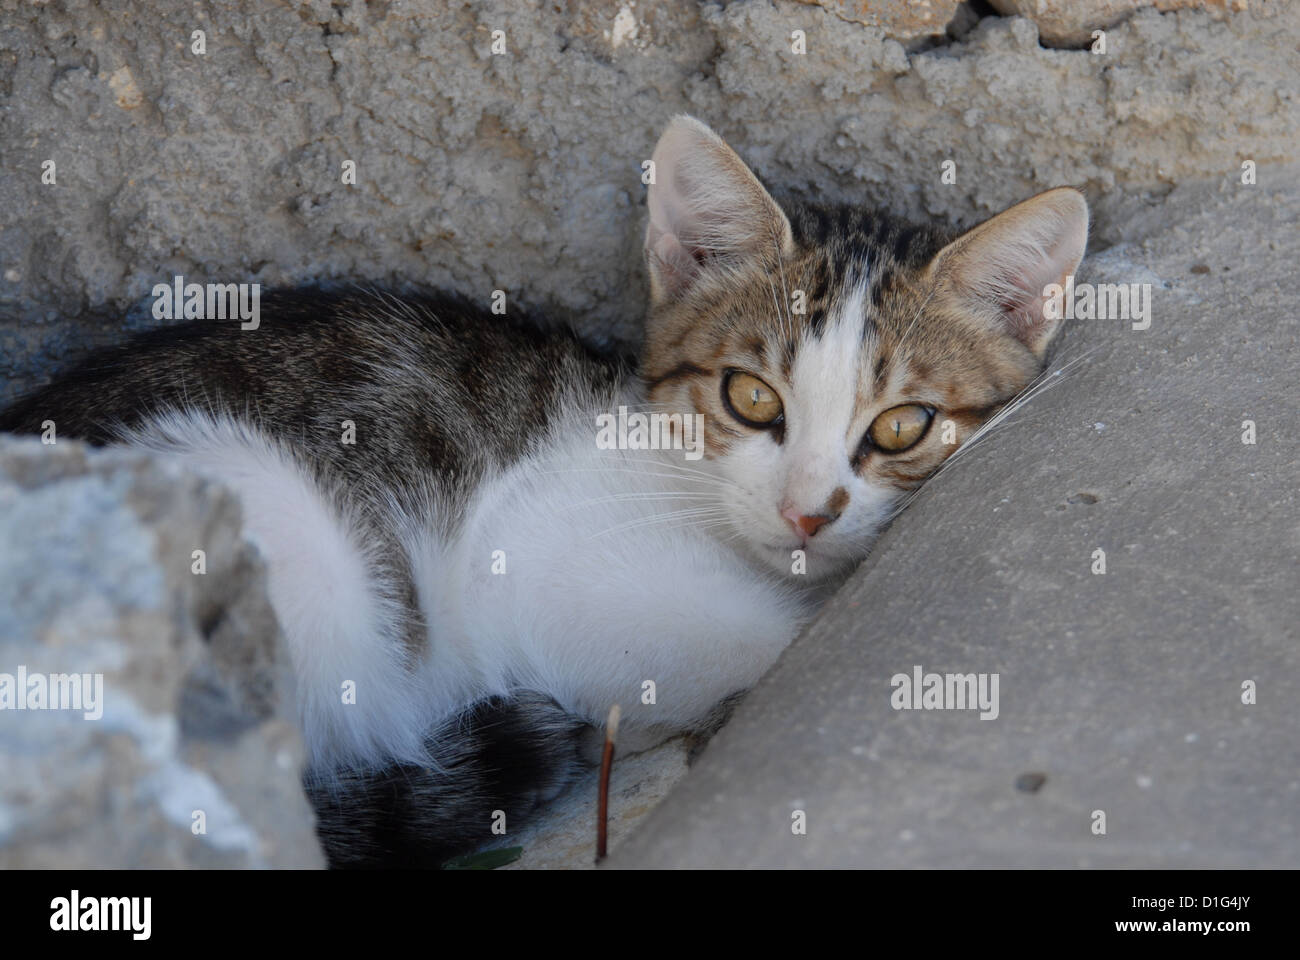 Tabby and White, resting, leaning on a rock, Greece, Dodecanese Island, Non-pedigree Shorthair, felis silvestris forma catus, do Stock Photo